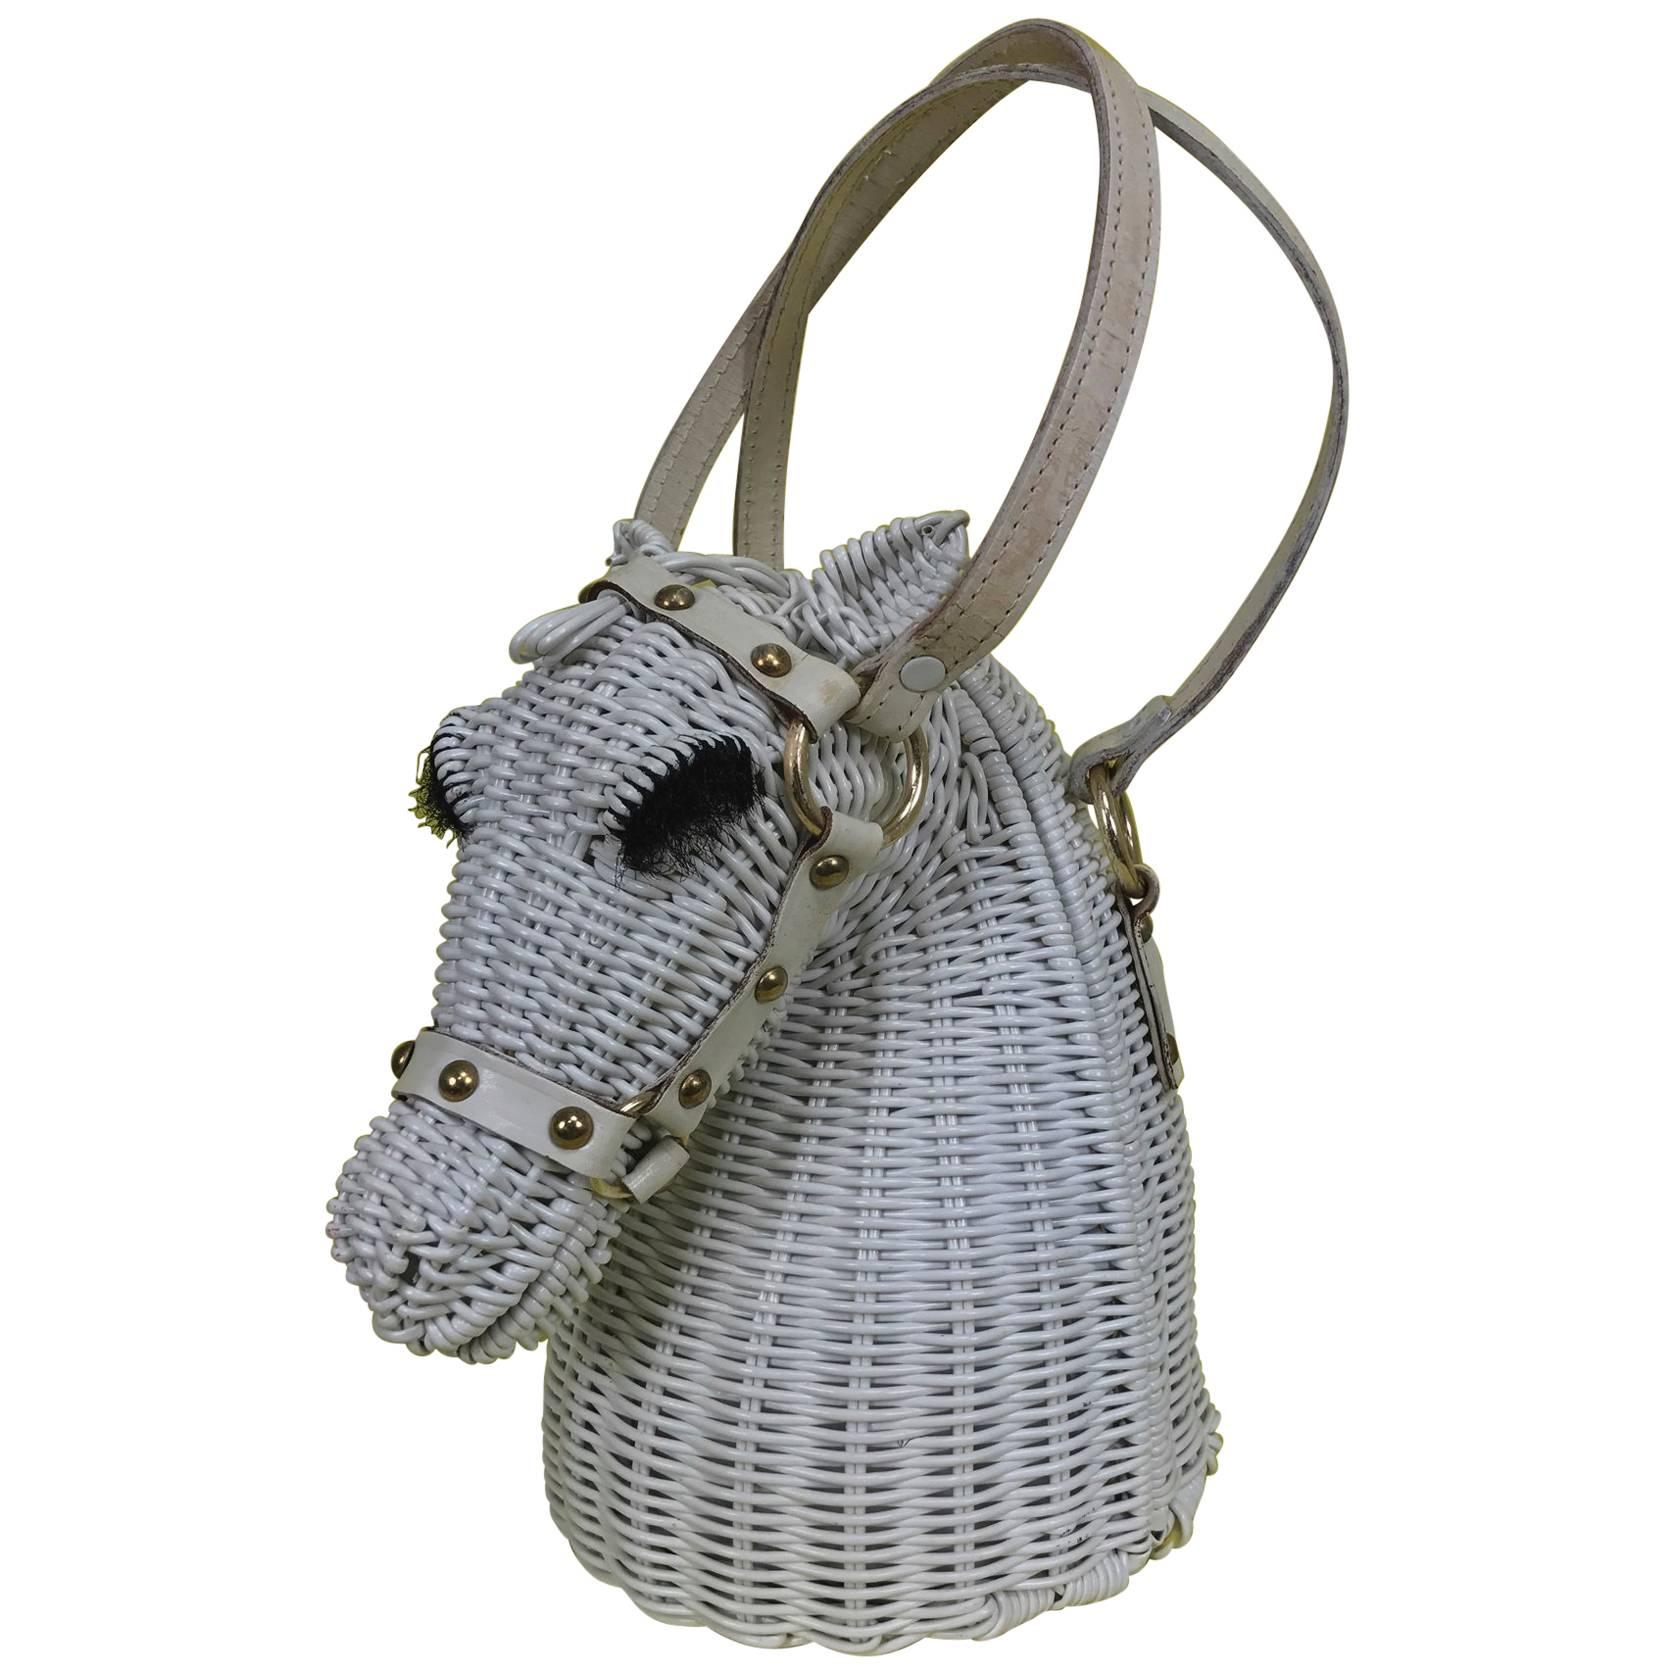 Vintage Marcus Brothers white wicker horse head with eyelashes handbag 1960s